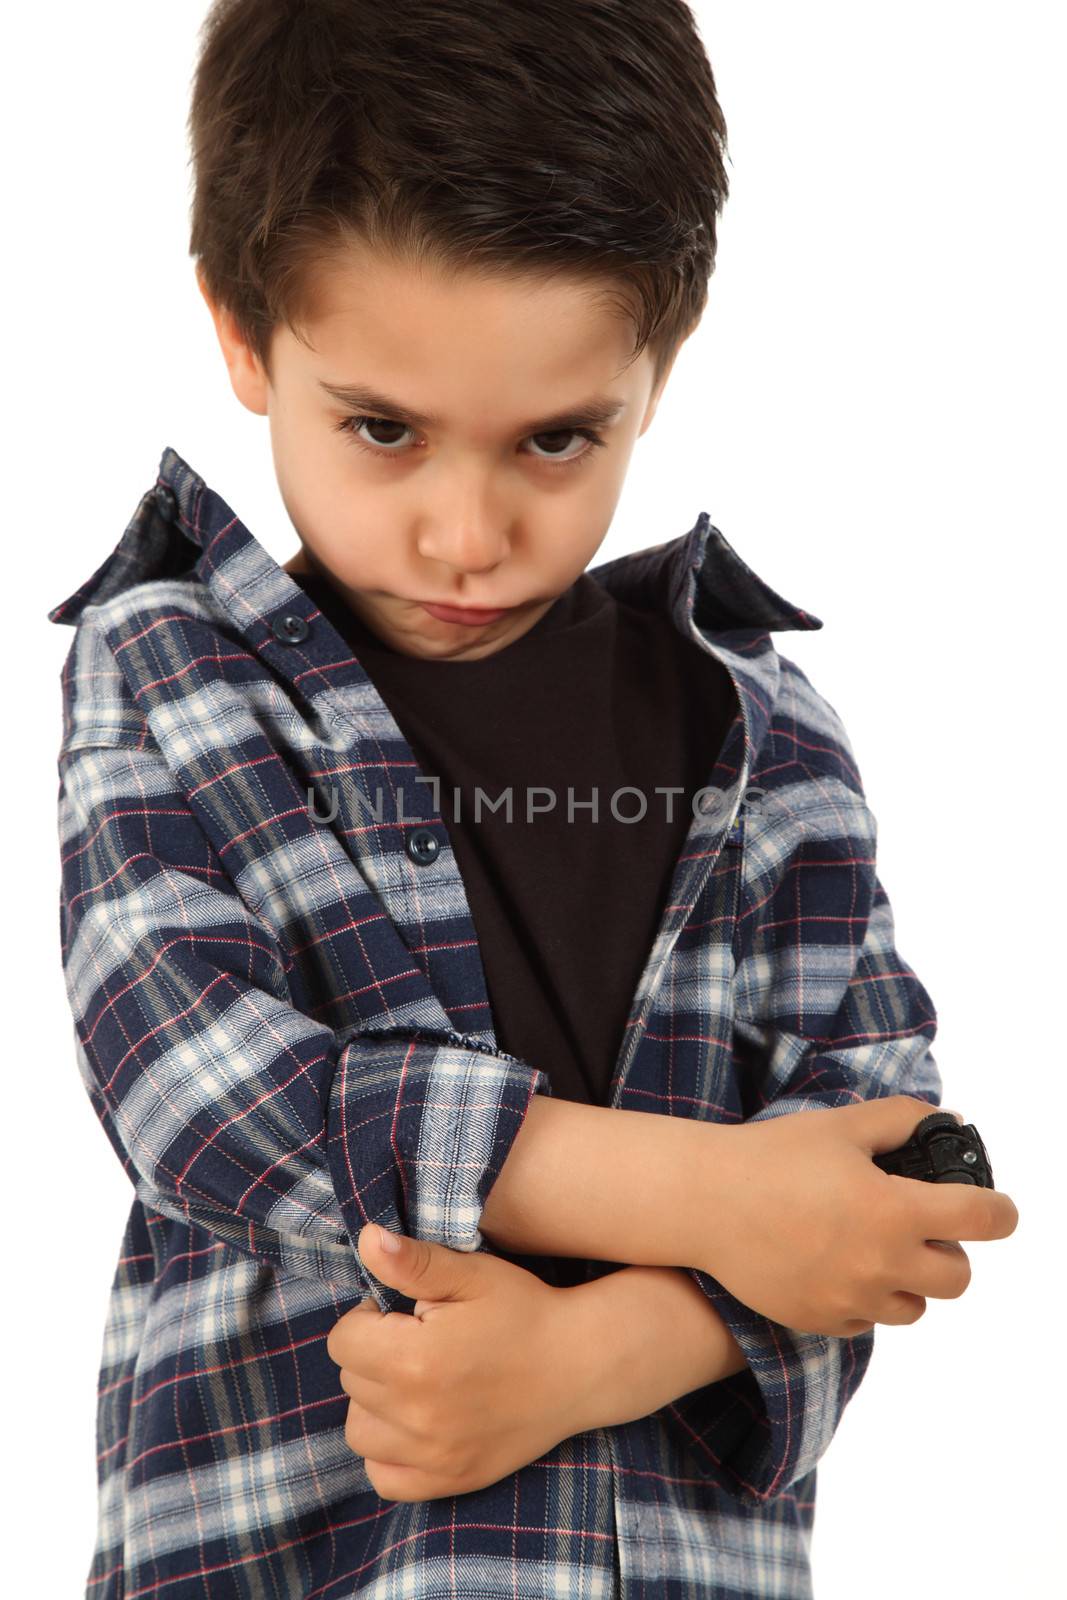 Male child with fear expression by shamtor